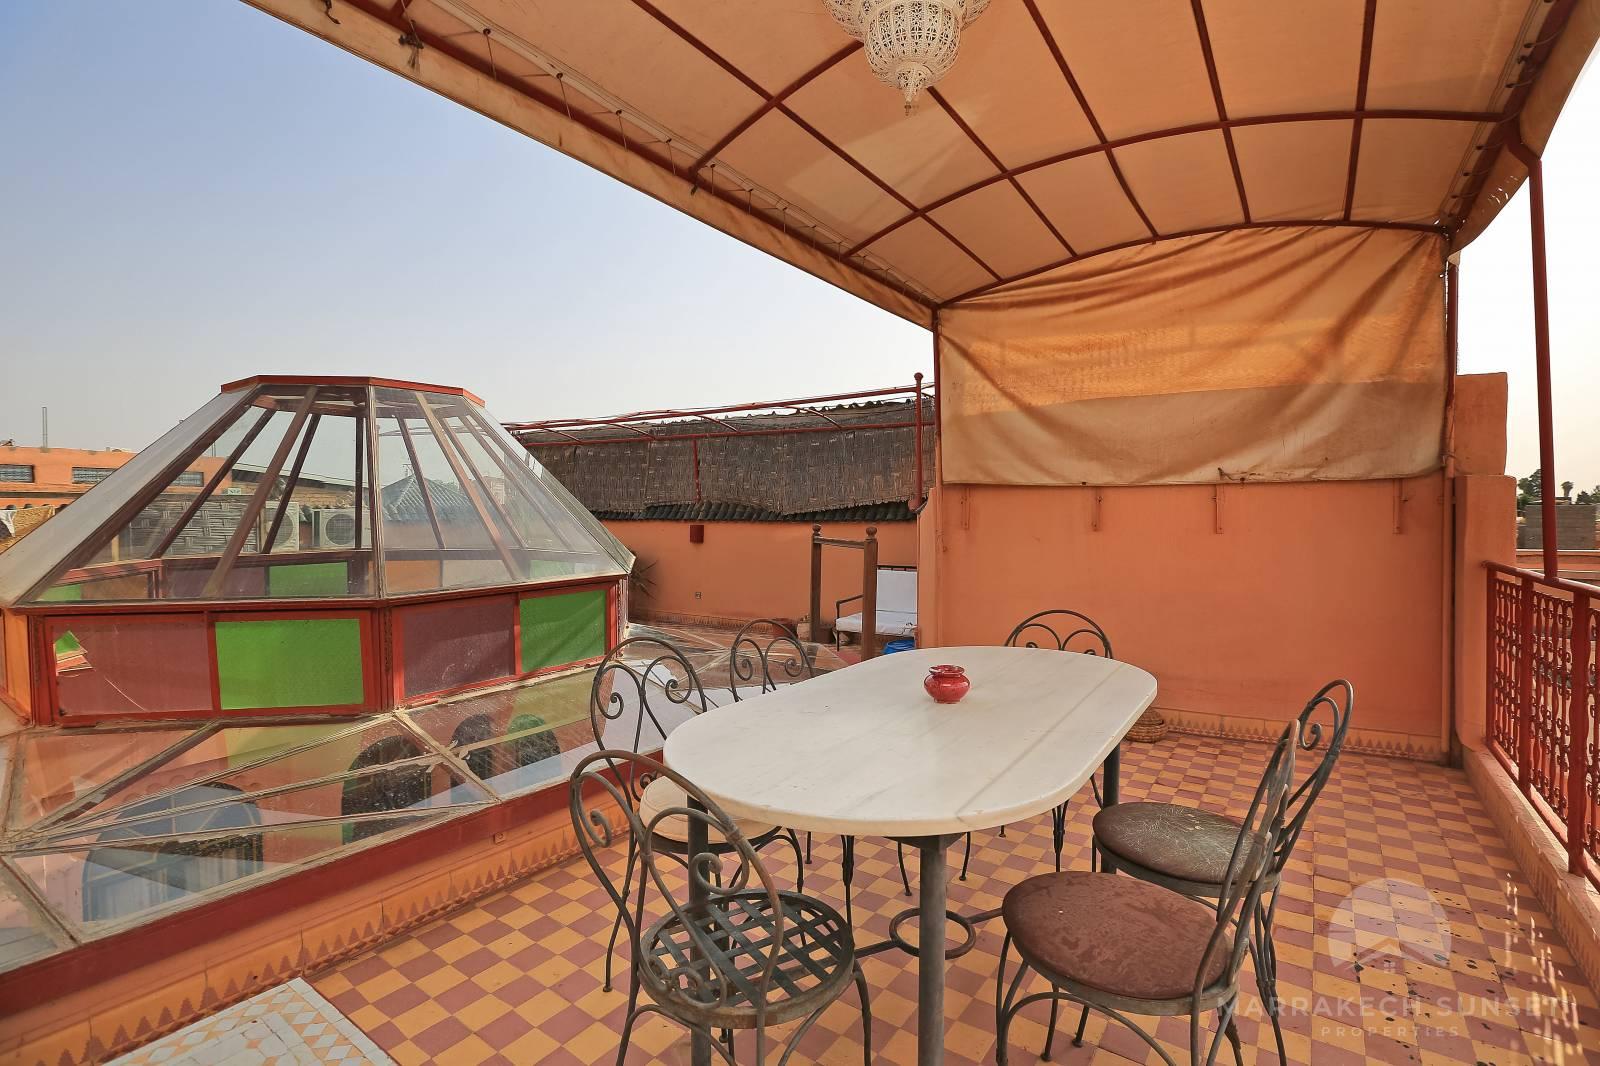 An exceptional 6 bedroom Marrakech riad for sale near Jemaa el fna square